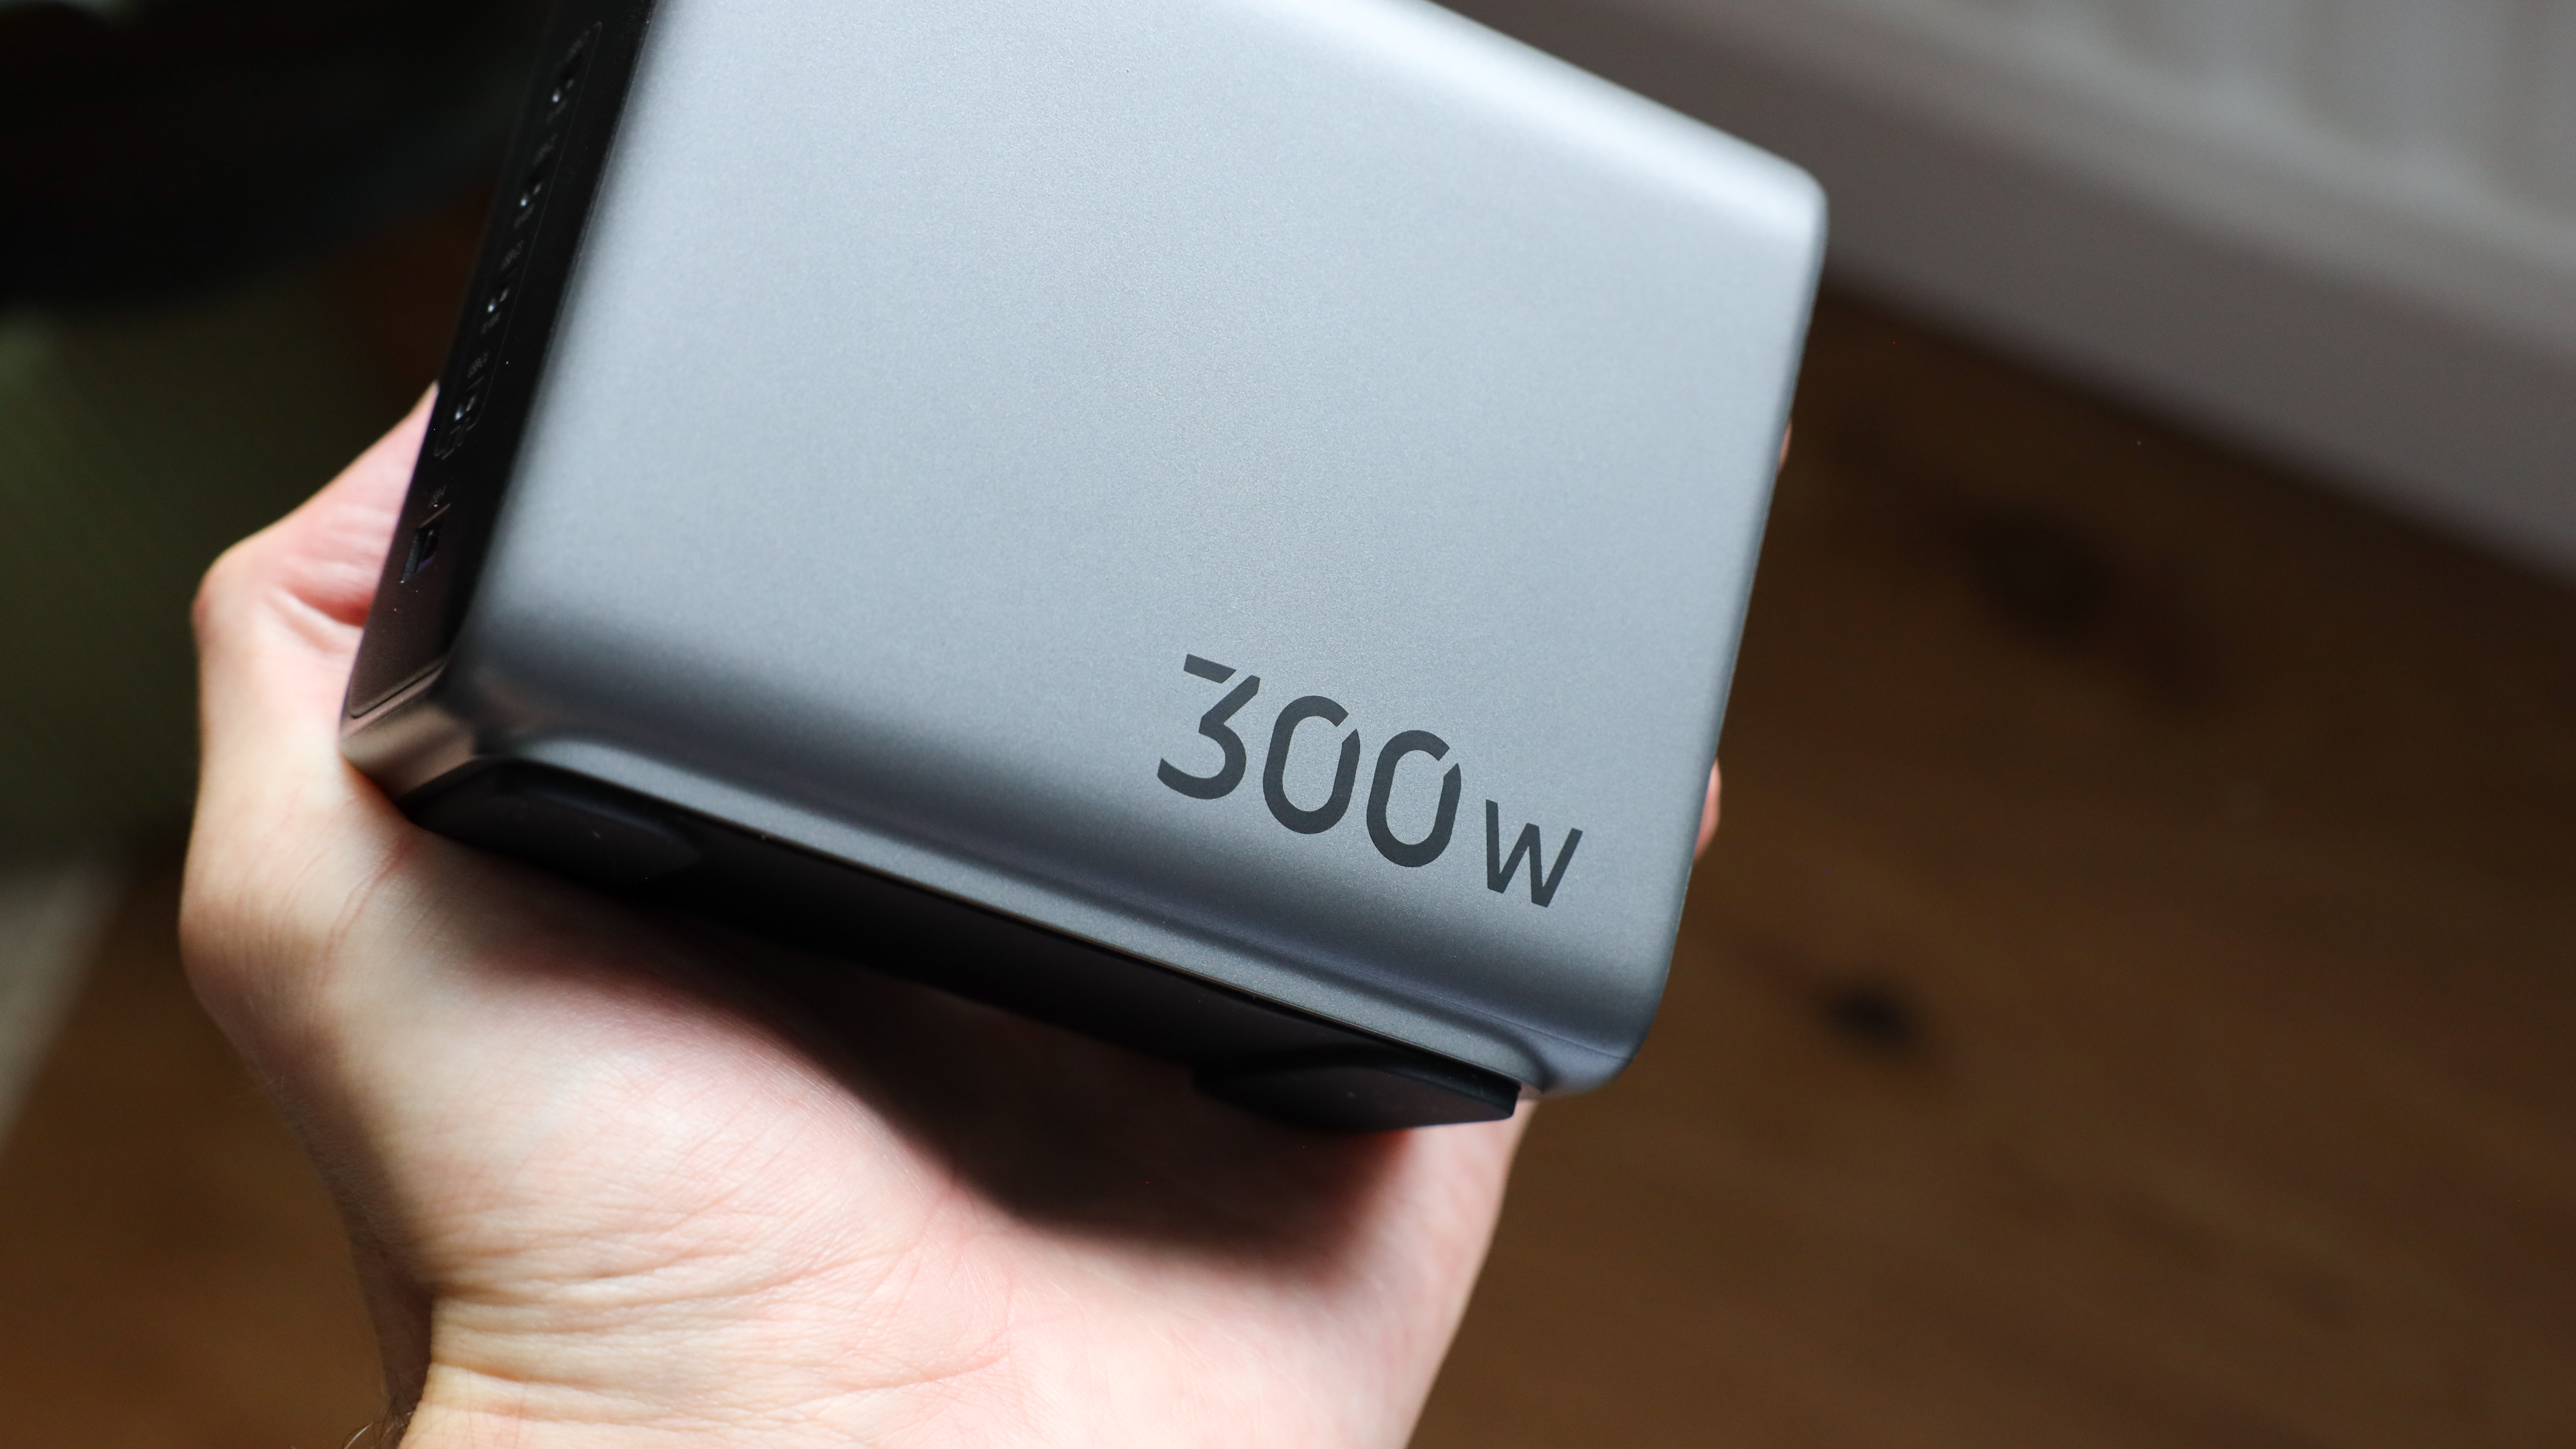 UGREEN Nexode 300W GaN Desktop Charger Review: One Charger to Rule